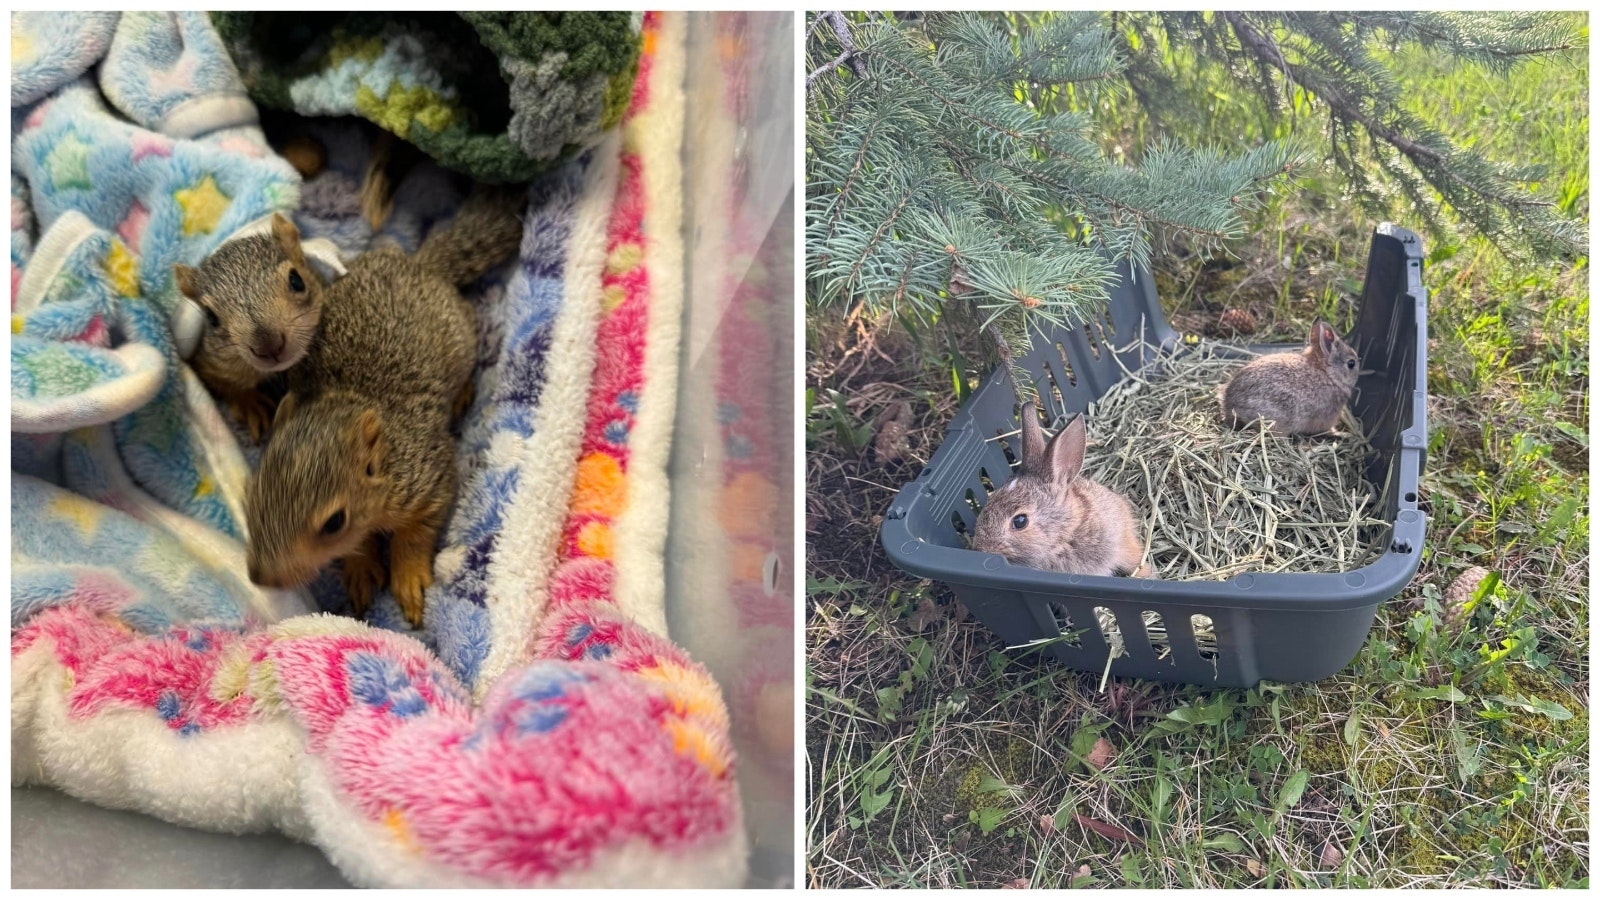 Left, squirrels are one of Suzanne Hansen's favorite animals to rehab because they're so entertaining. Right, once they're old enough to fend for themselves, the rabbits rescued by Hansen are released into the wild per Wyoming Game and Fish regulations.